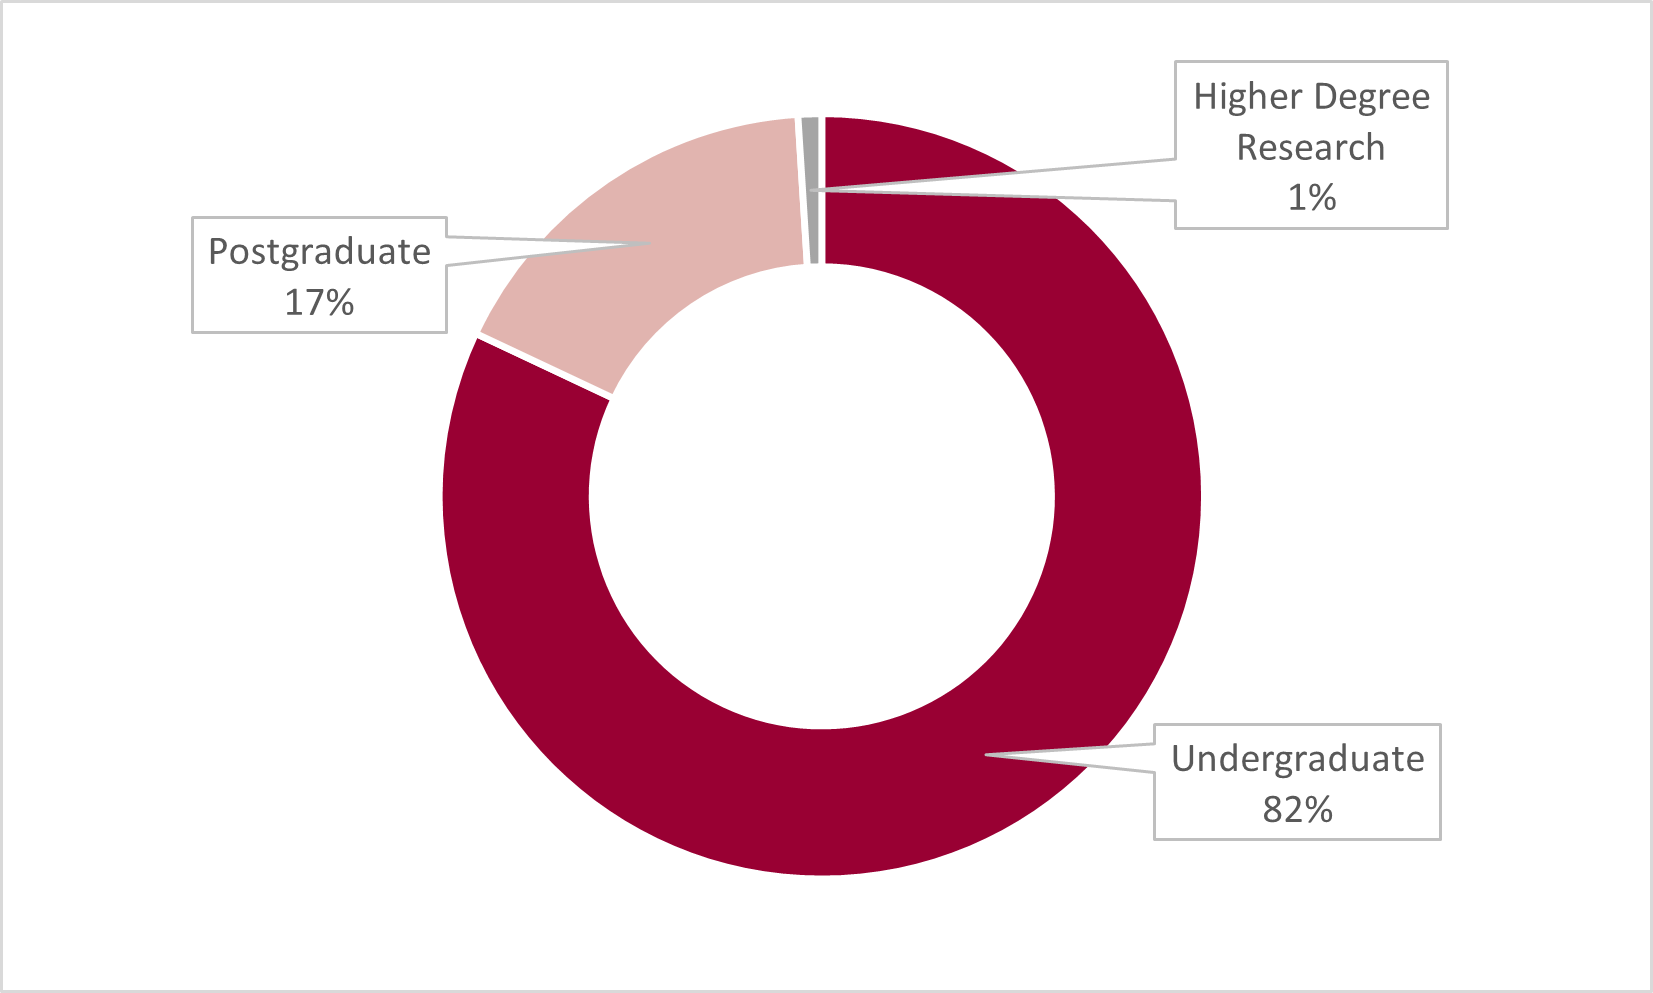 A breakdown of our students by level